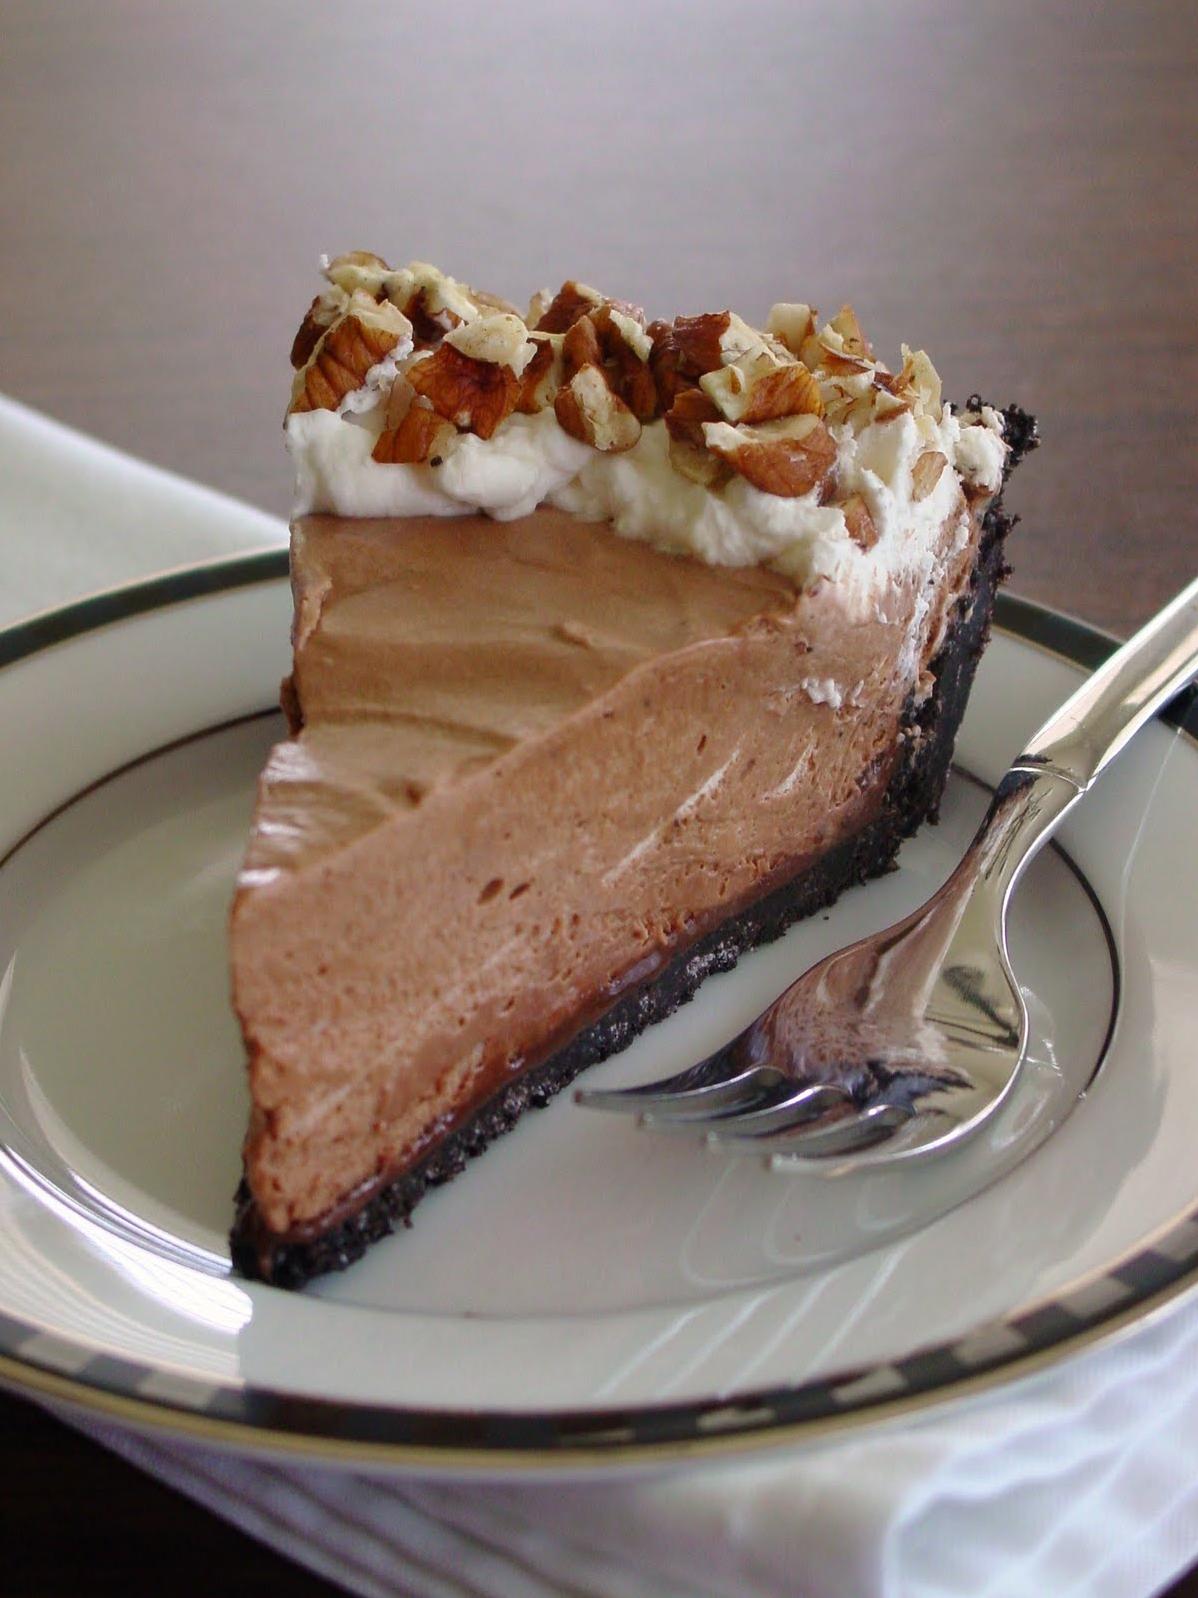  Satisfy your caffeine and dessert cravings in one go with this Mocha Frappe Pie!